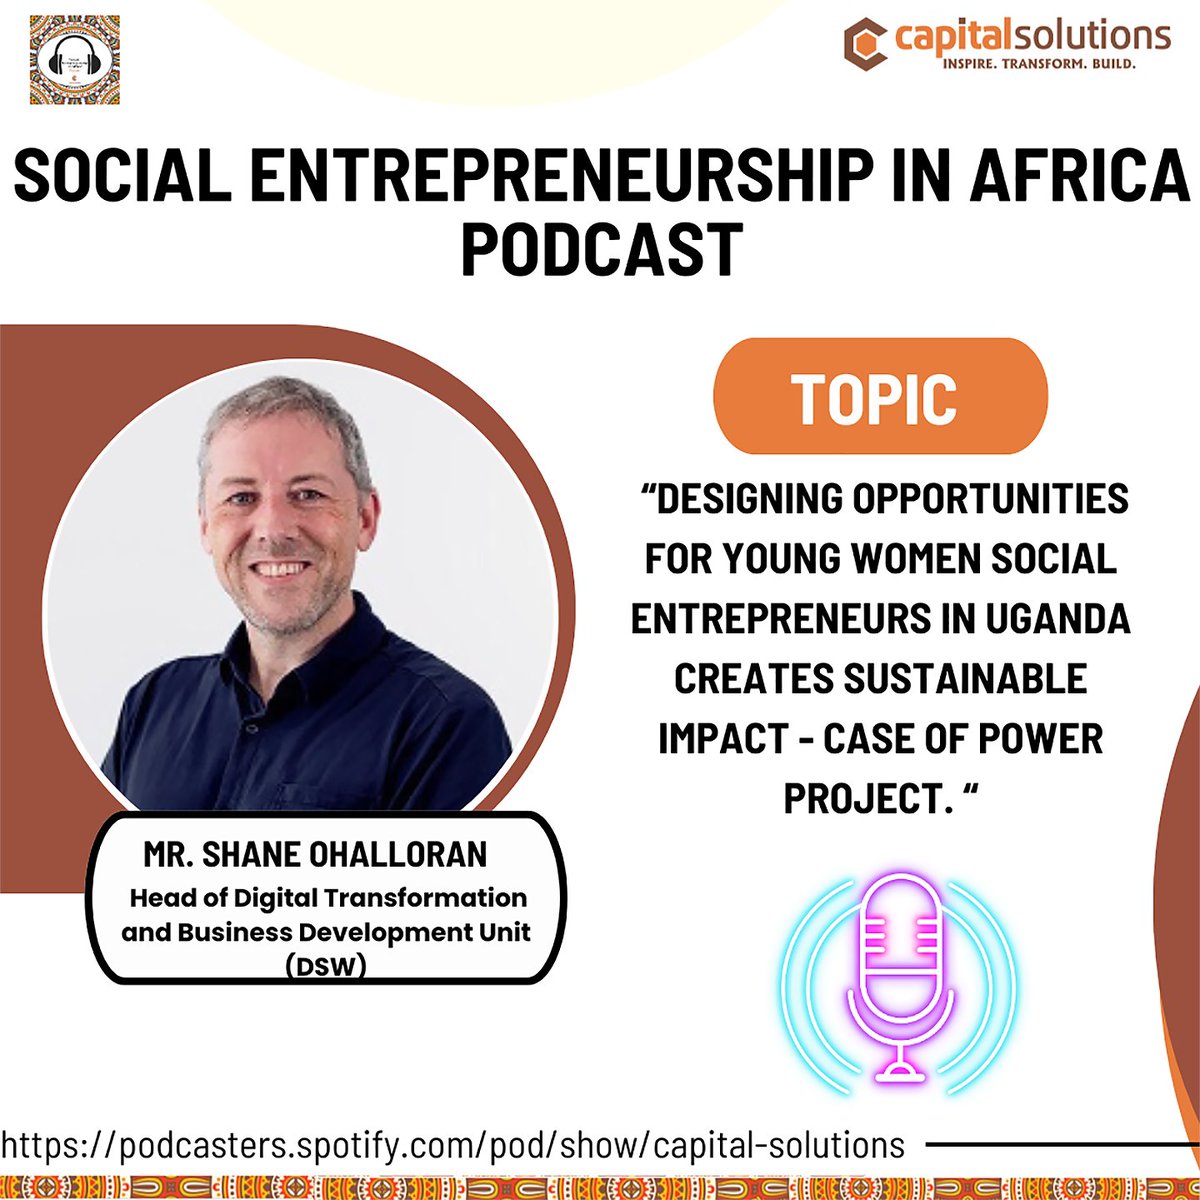 New Podcast Alert🎙 Mr. Shane Ohalloran dives into his experience, key takeaways and the success stories of young women #entrepreneurs in the Pilot #POWER Project who scaled their #SRHR/FP businesses in just 9 months! Click link to listen 👉bit.ly/POWERpodcast